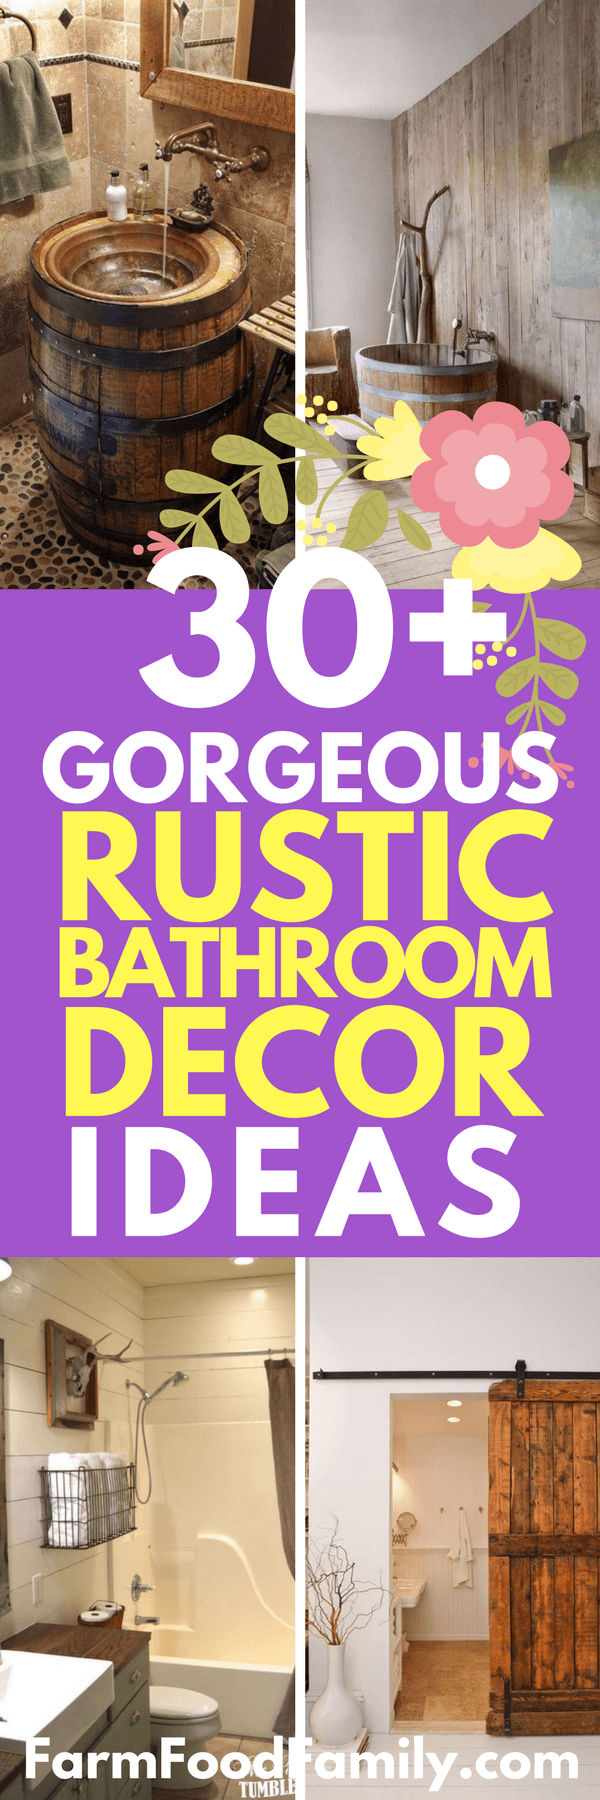 Your budget and bathroom size will also affect the type of design that you will be creating. You won’t be able to use a lot of stonework in your bathroom if you have a shoestring budget to work with, so plan wisely and use accessories and accent pieces instead of tackling the entire room. For small bathrooms, a little rustic charm will go a long way.